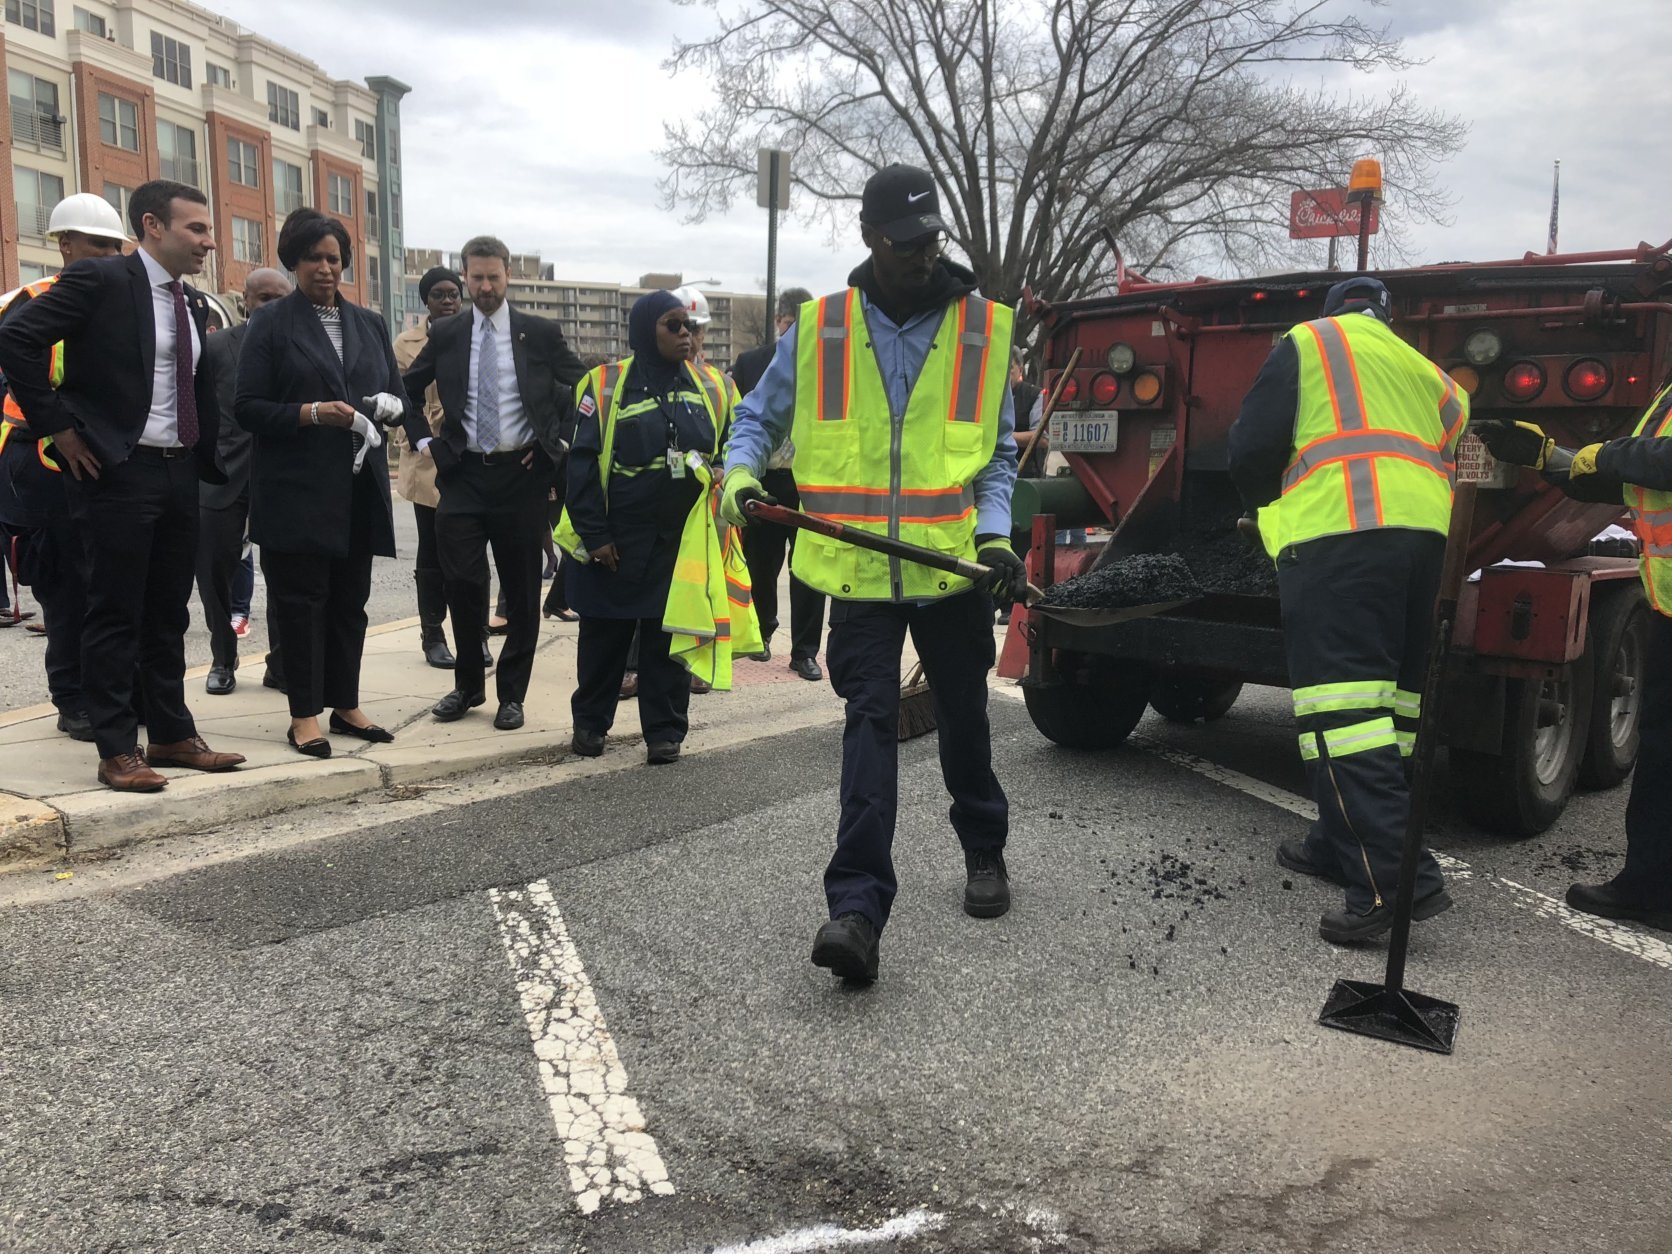 While it may not feel like it to some drivers, the District Department of Transportation said its crews have already filled more than 22,000 potholes across the city in just the last three months. (WTOP/Max Smith)